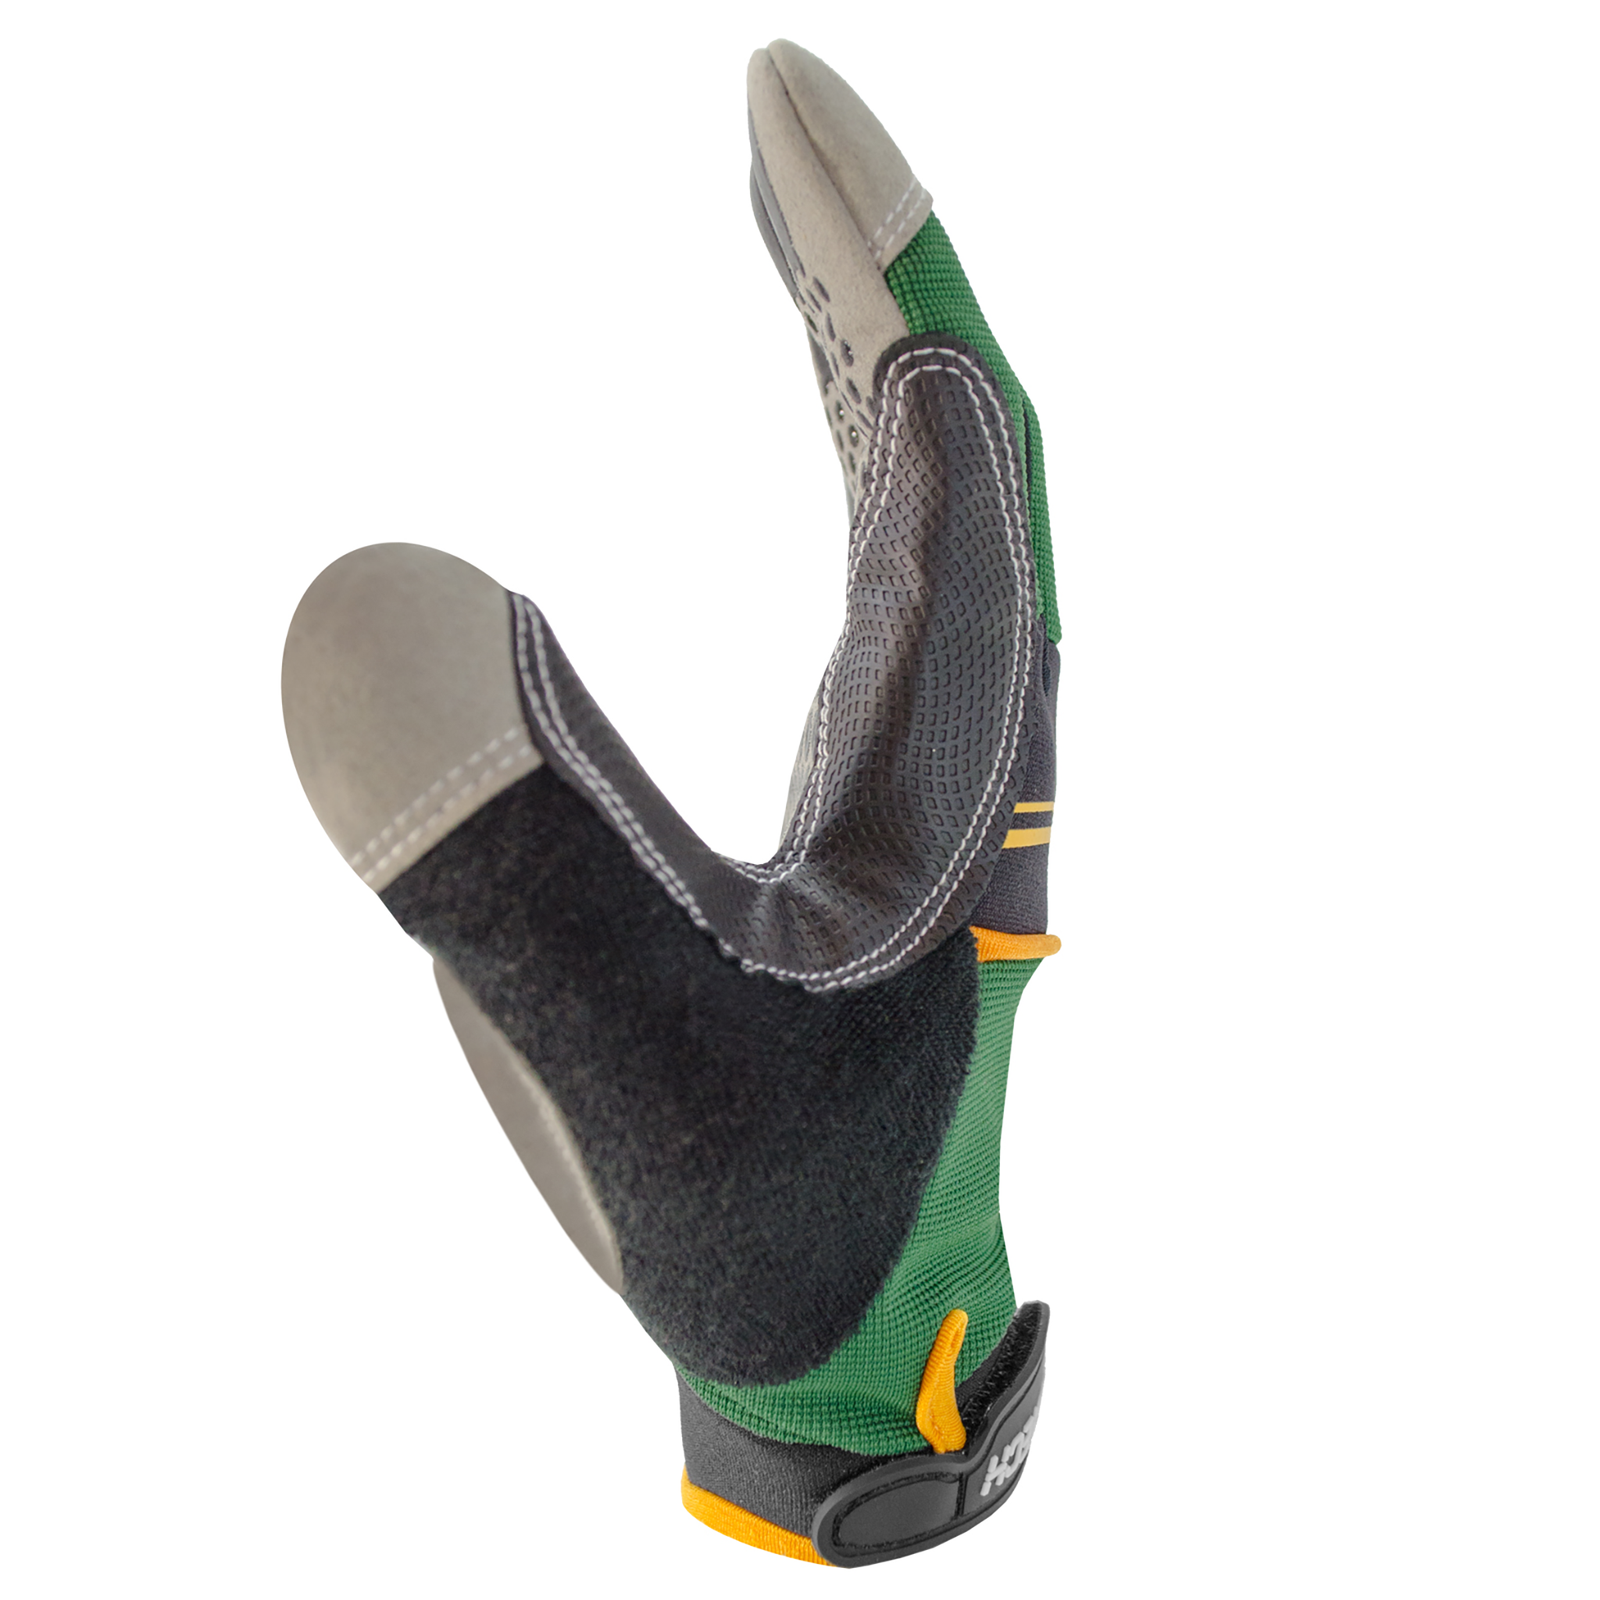 Side view of the green JORESTECH safety work glove with anti slip silicone black dotted palms